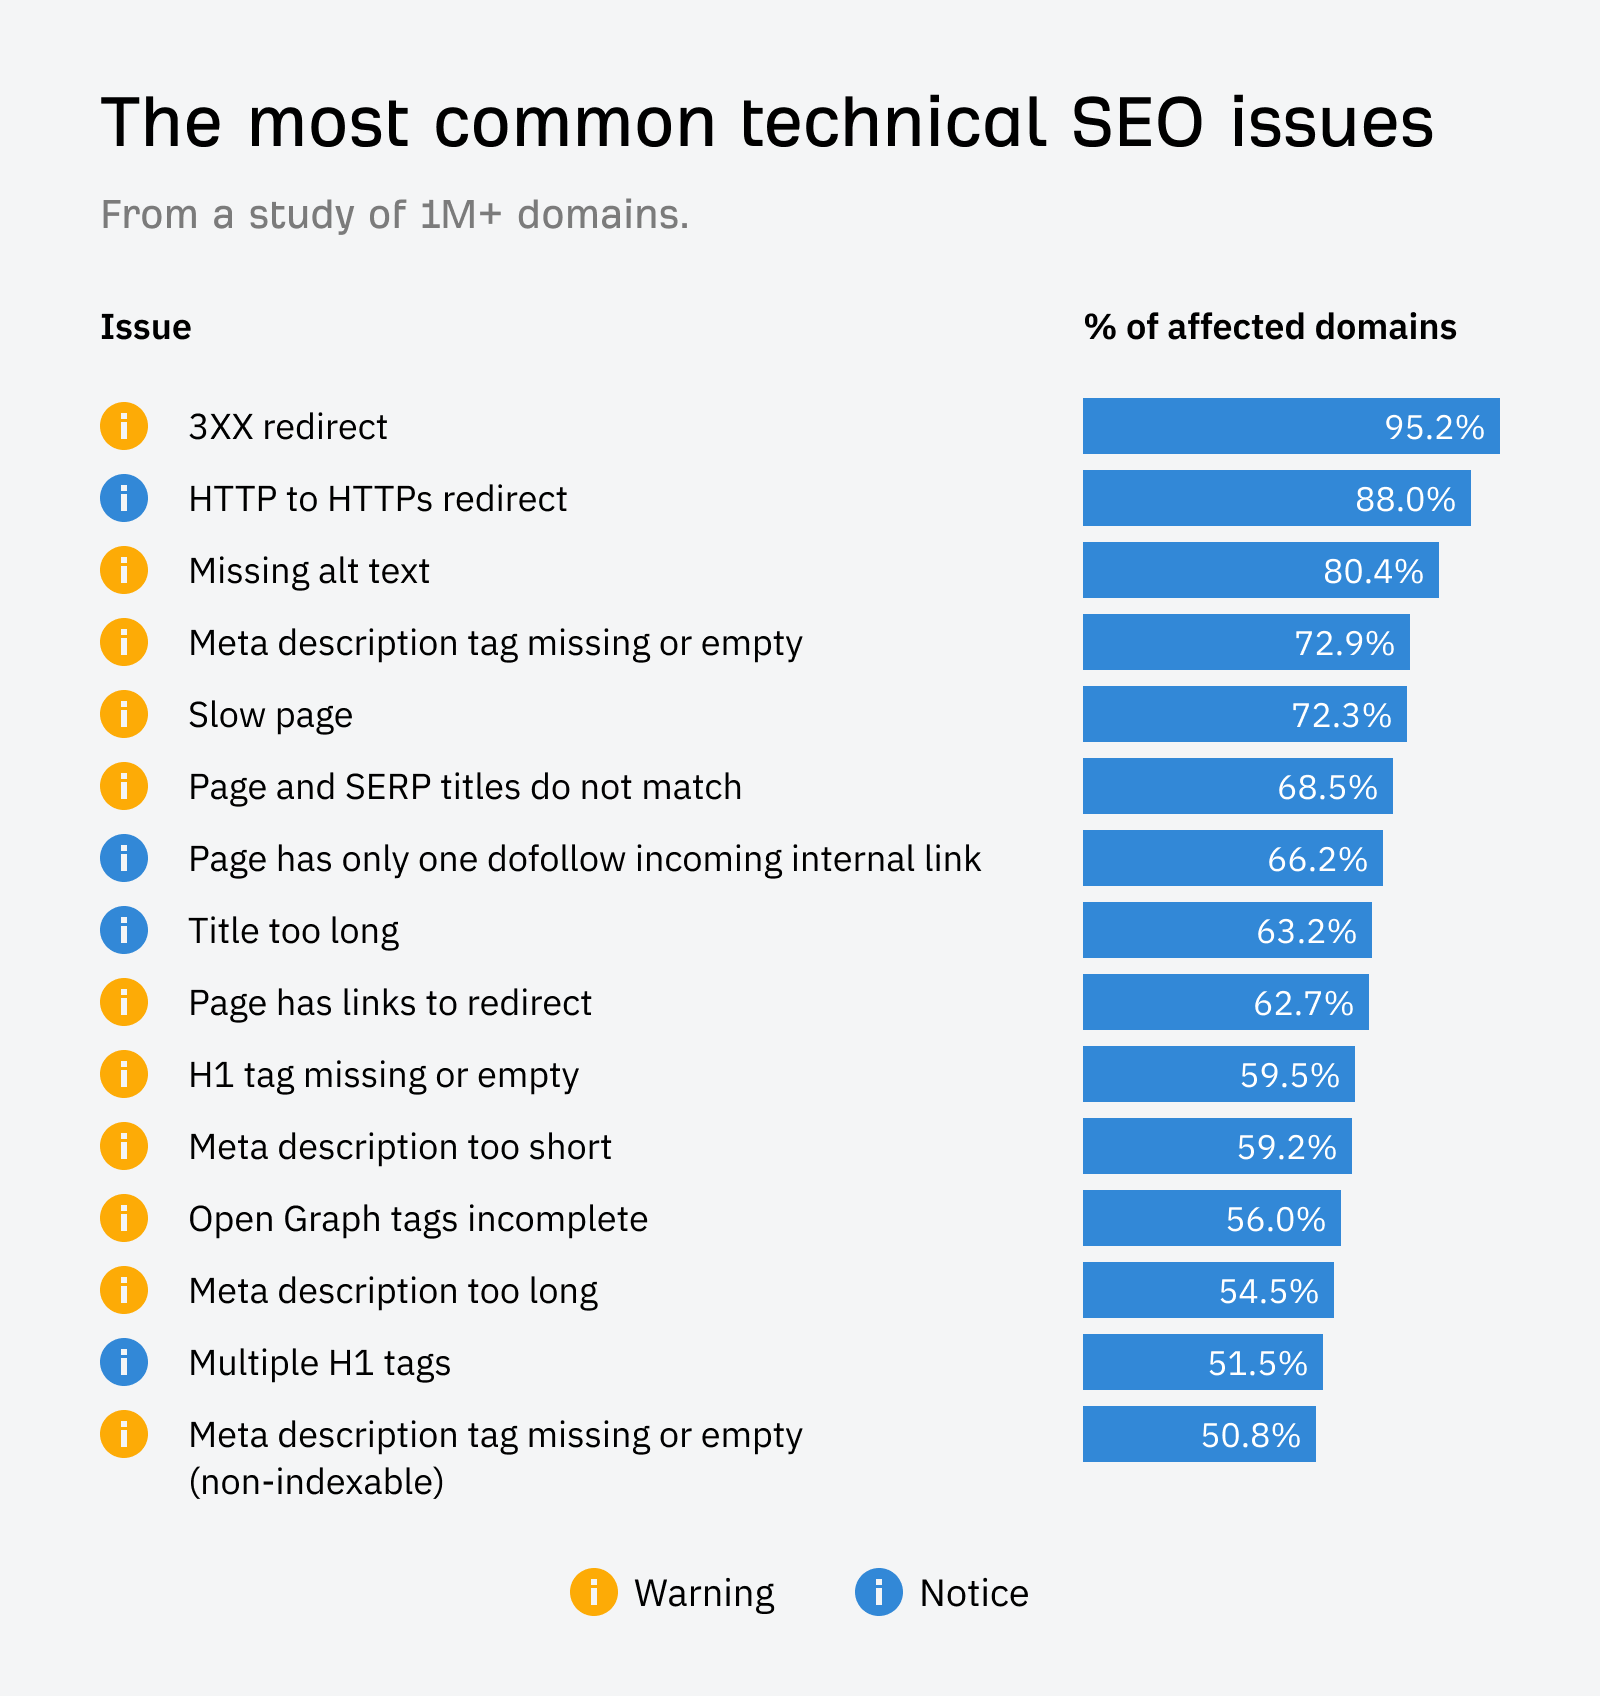 Chart showing the most common technical SEO issues